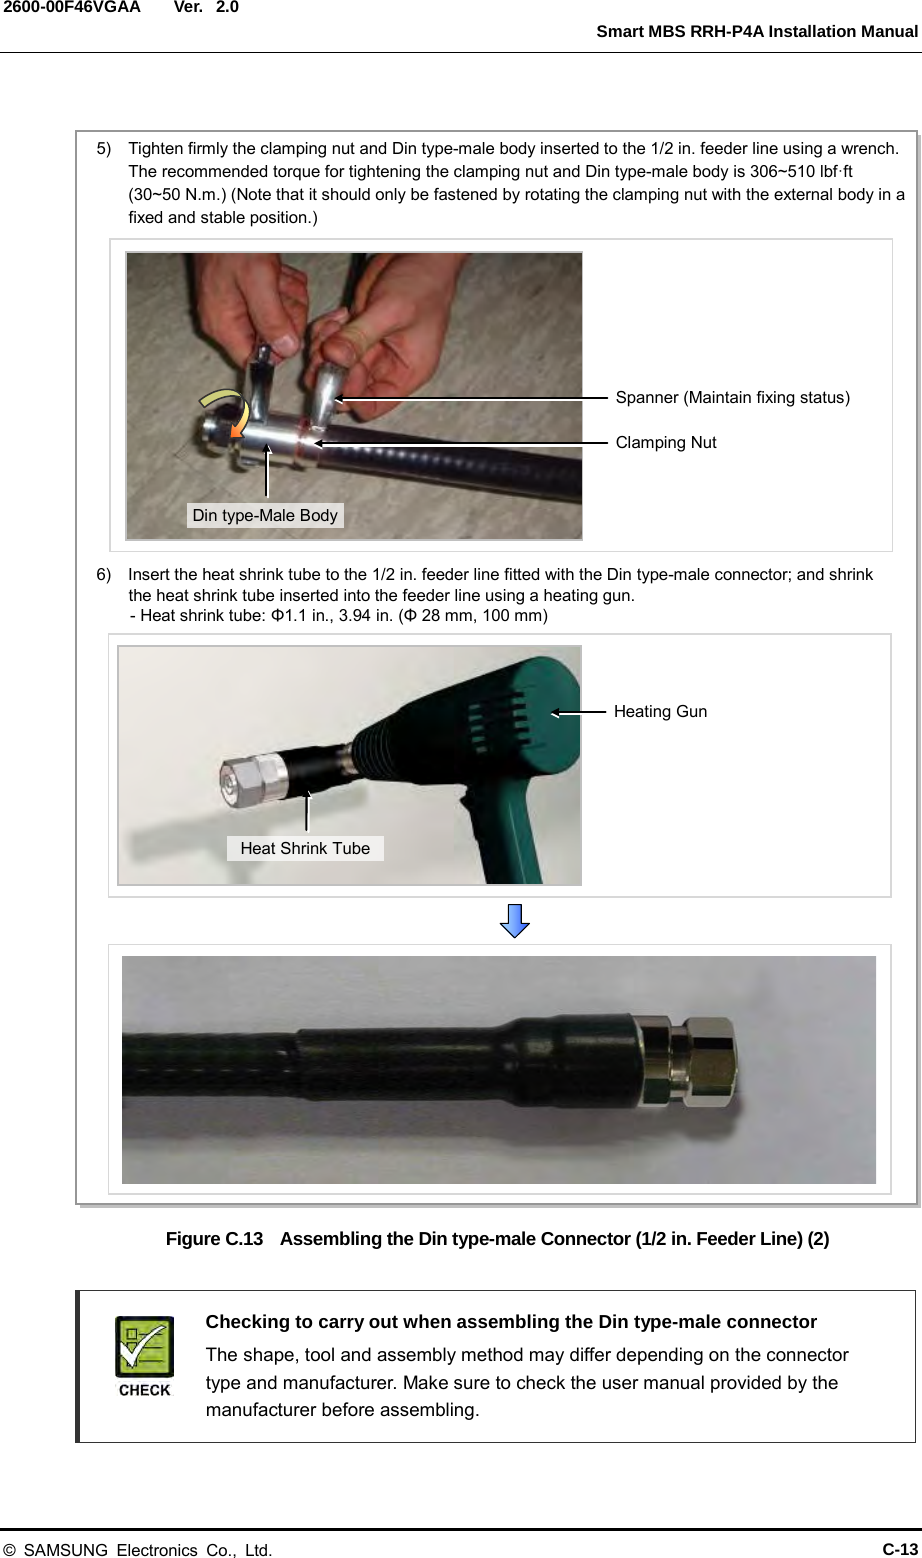  Ver.   Smart MBS RRH-P4A Installation Manual 2600-00F46VGAA 2.0  Figure C.13  Assembling the Din type-male Connector (1/2 in. Feeder Line) (2)   Checking to carry out when assembling the Din type-male connector    The shape, tool and assembly method may differ depending on the connector type and manufacturer. Make sure to check the user manual provided by the manufacturer before assembling.  5)  Tighten firmly the clamping nut and Din type-male body inserted to the 1/2 in. feeder line using a wrench. The recommended torque for tightening the clamping nut and Din type-male body is 306~510 lbf·ft (30~50 N.m.) (Note that it should only be fastened by rotating the clamping nut with the external body in a fixed and stable position.) 6)  Insert the heat shrink tube to the 1/2 in. feeder line fitted with the Din type-male connector; and shrink the heat shrink tube inserted into the feeder line using a heating gun.     - Heat shrink tube: Φ1.1 in., 3.94 in. (Φ 28 mm, 100 mm) Heating Gun Heat Shrink Tube Spanner (Maintain fixing status) Clamping Nut Din type-Male Body © SAMSUNG Electronics Co., Ltd. C-13 